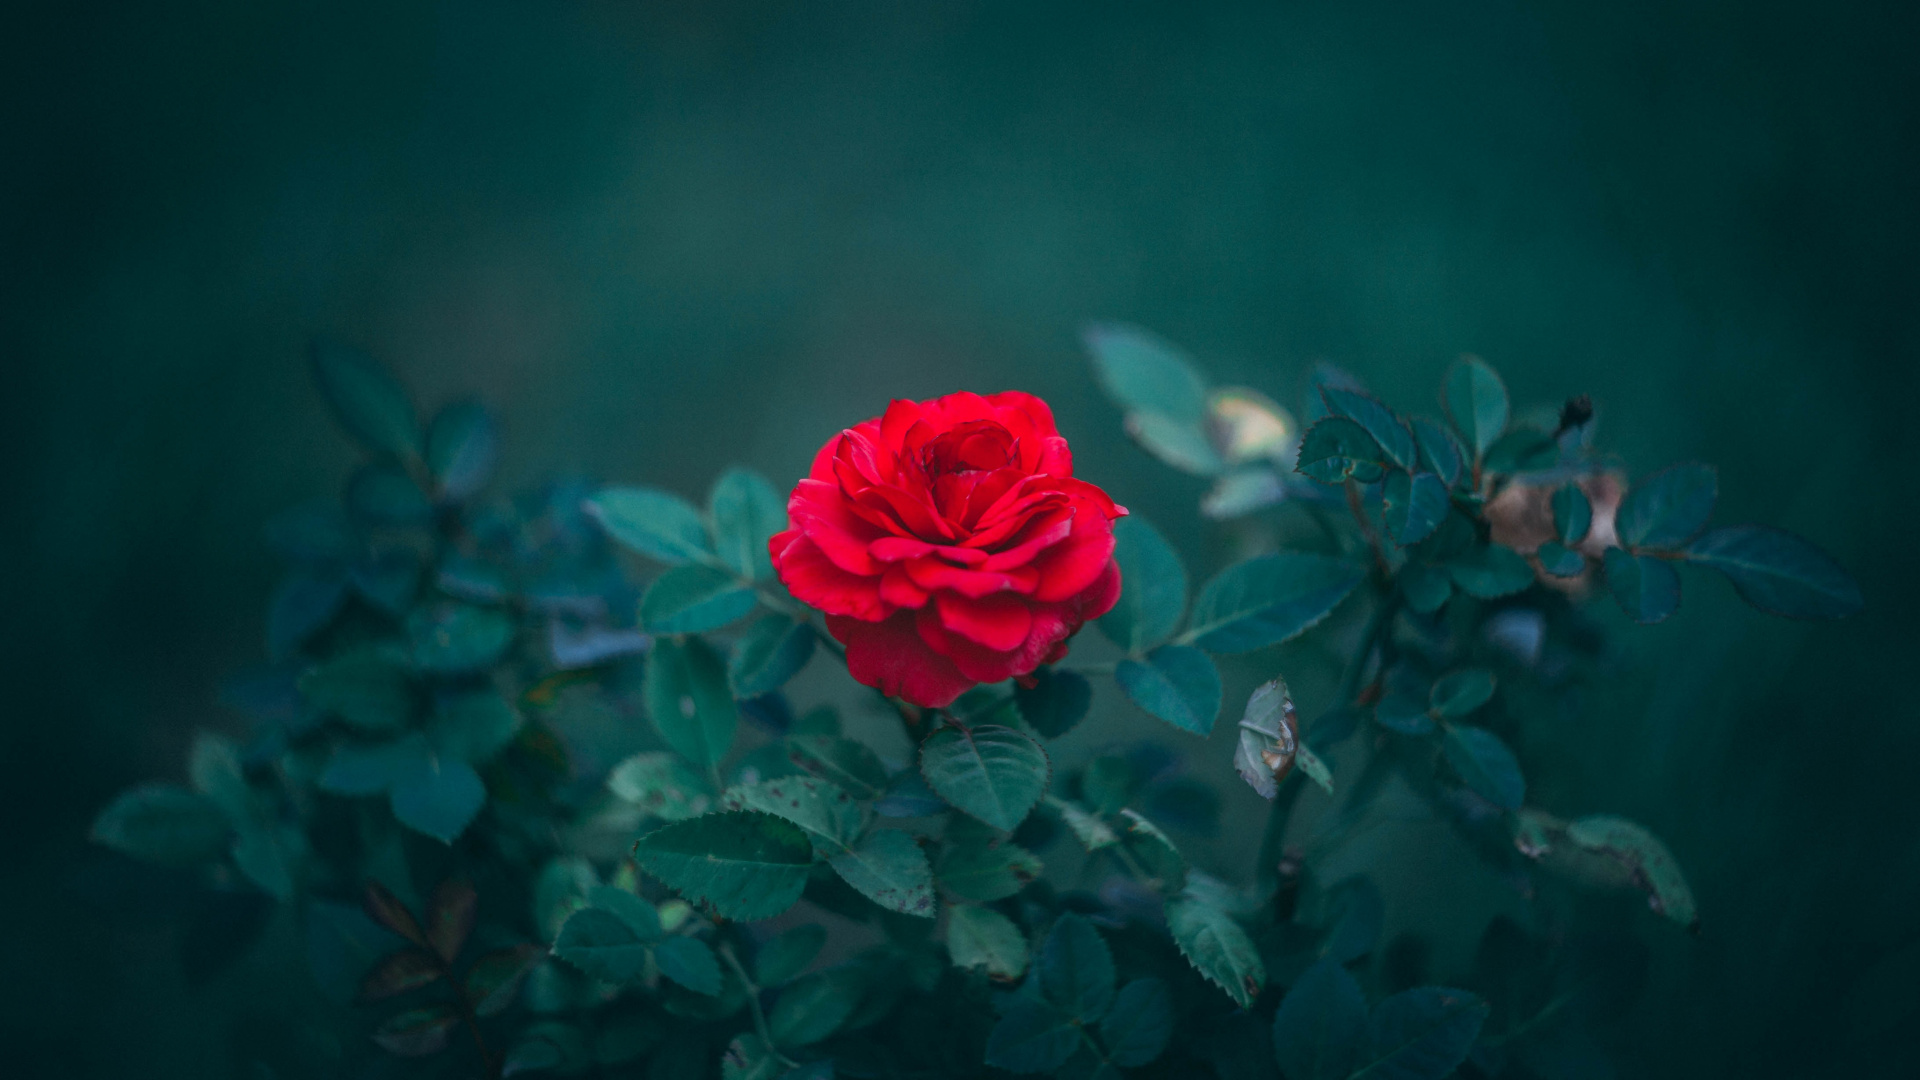 Red Rose in Bloom During Daytime. Wallpaper in 1920x1080 Resolution